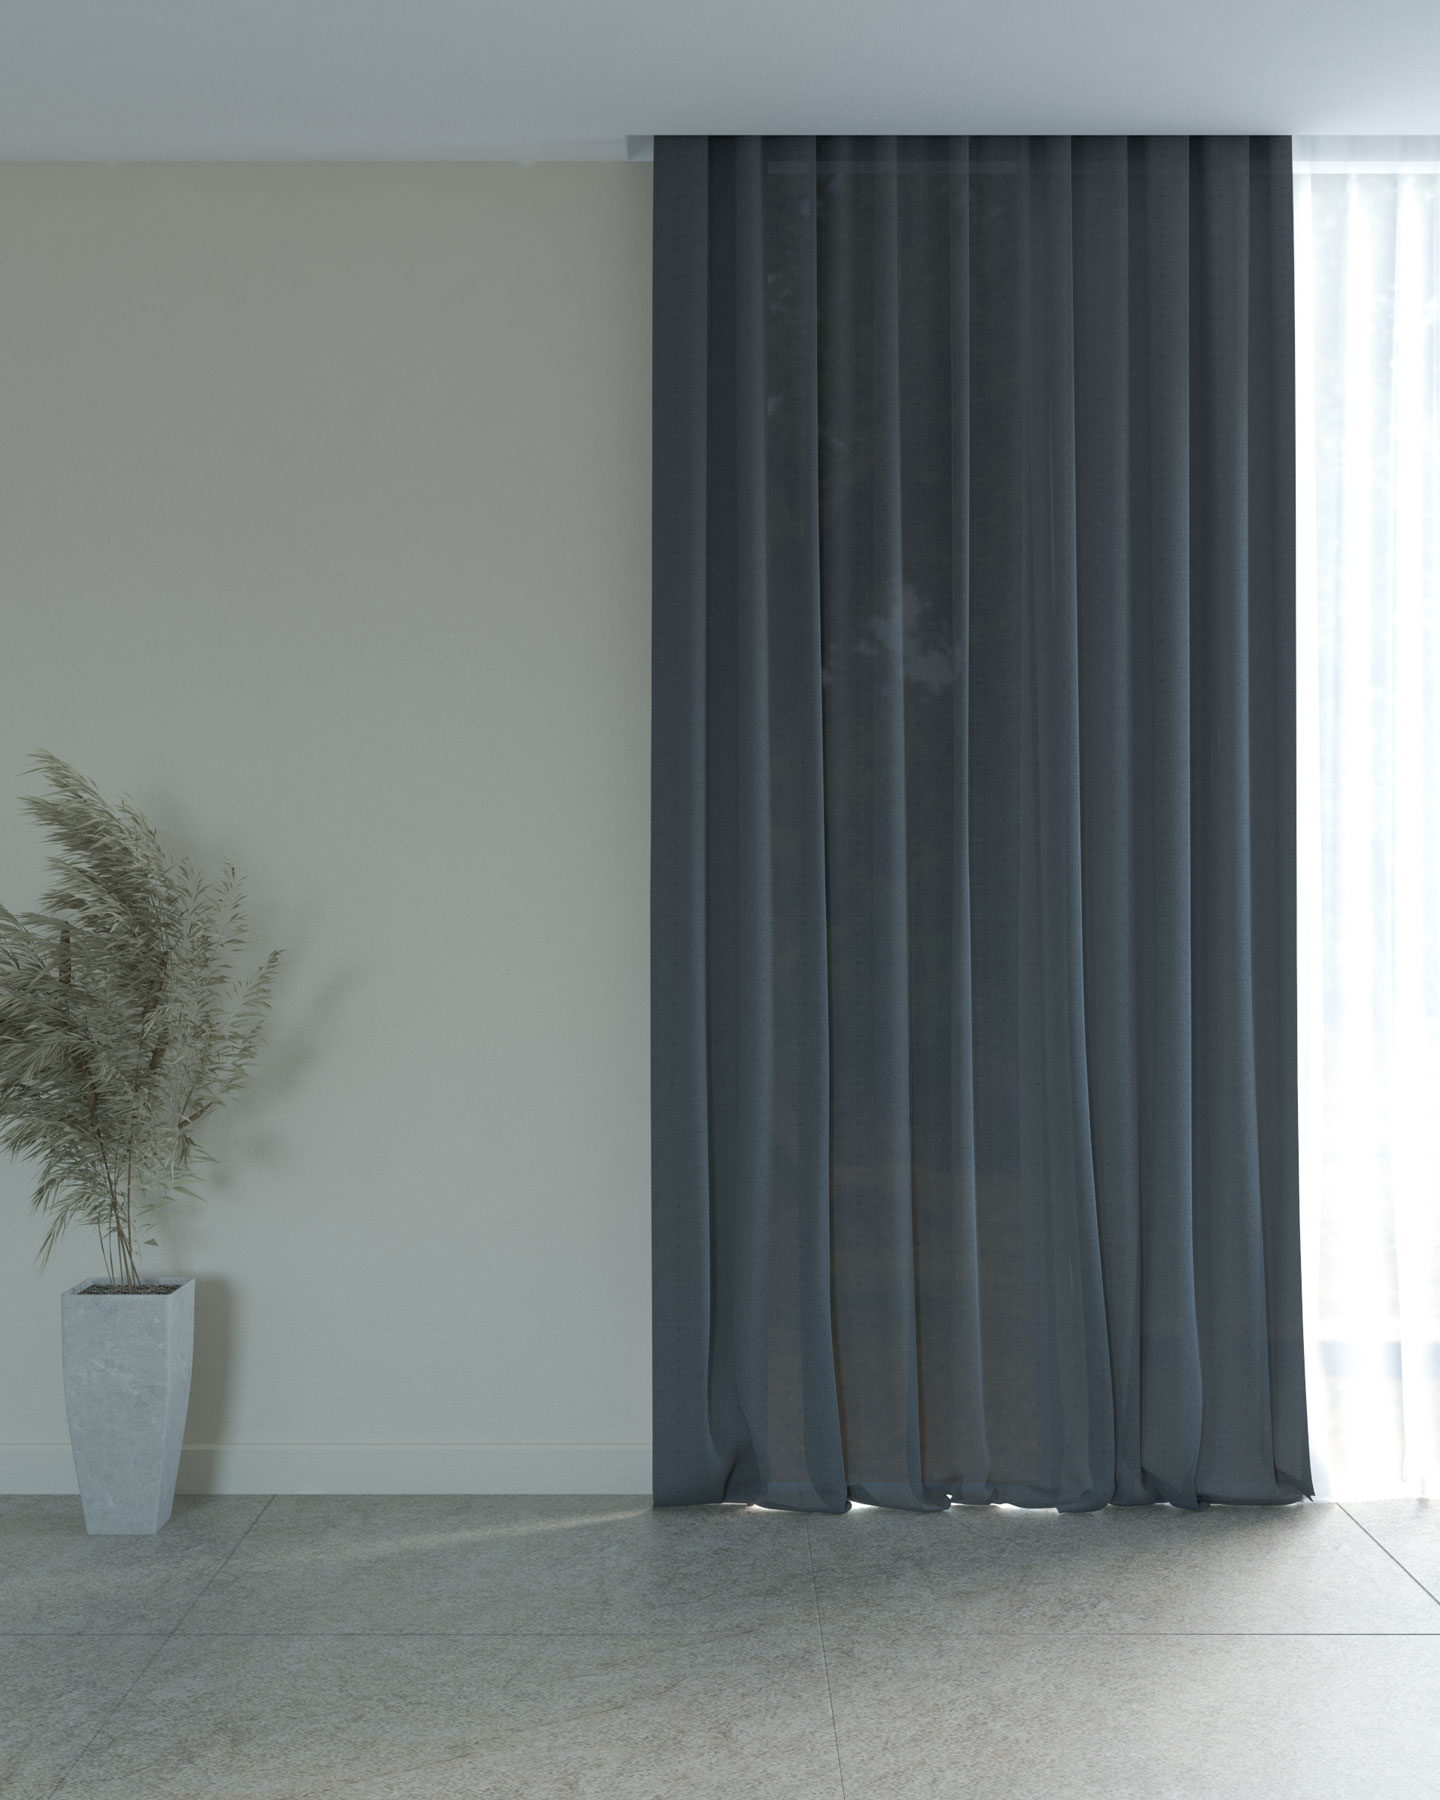 Black curtains with tan walls